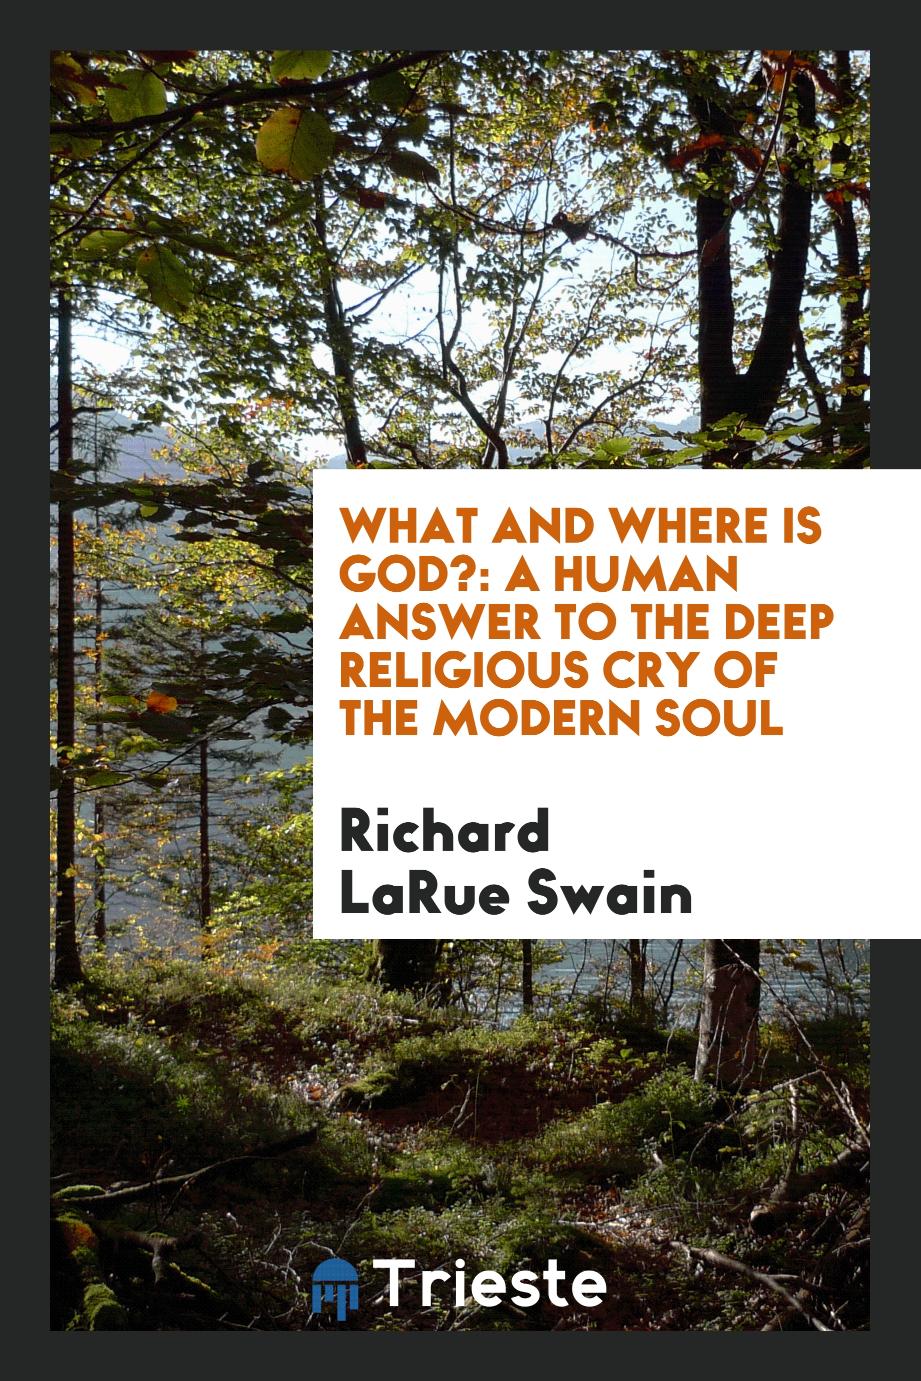 What and where is God?: a human answer to the deep religious cry of the modern soul